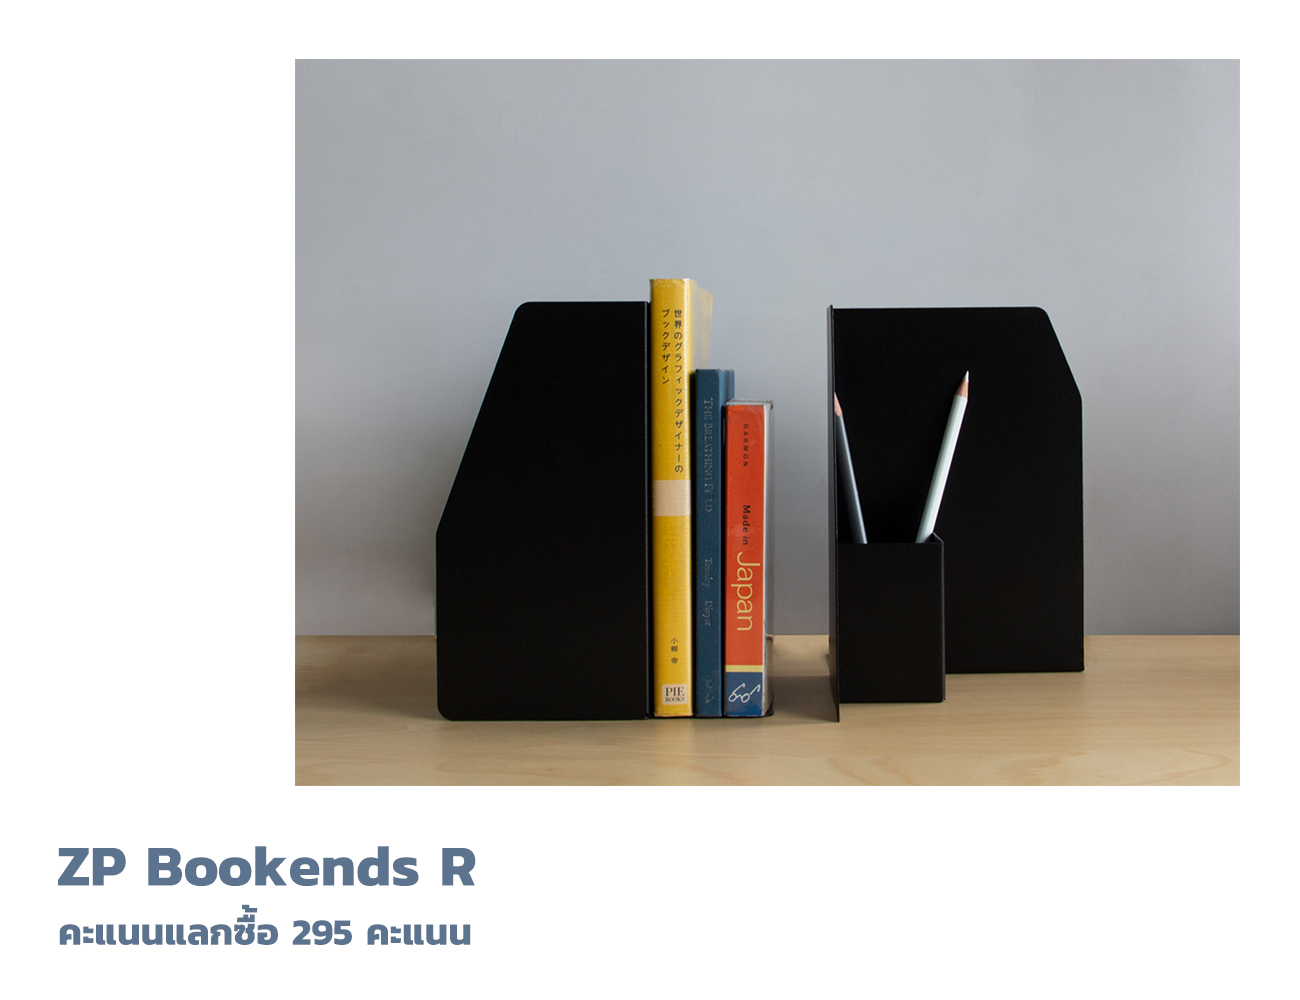 ZP Bookends R